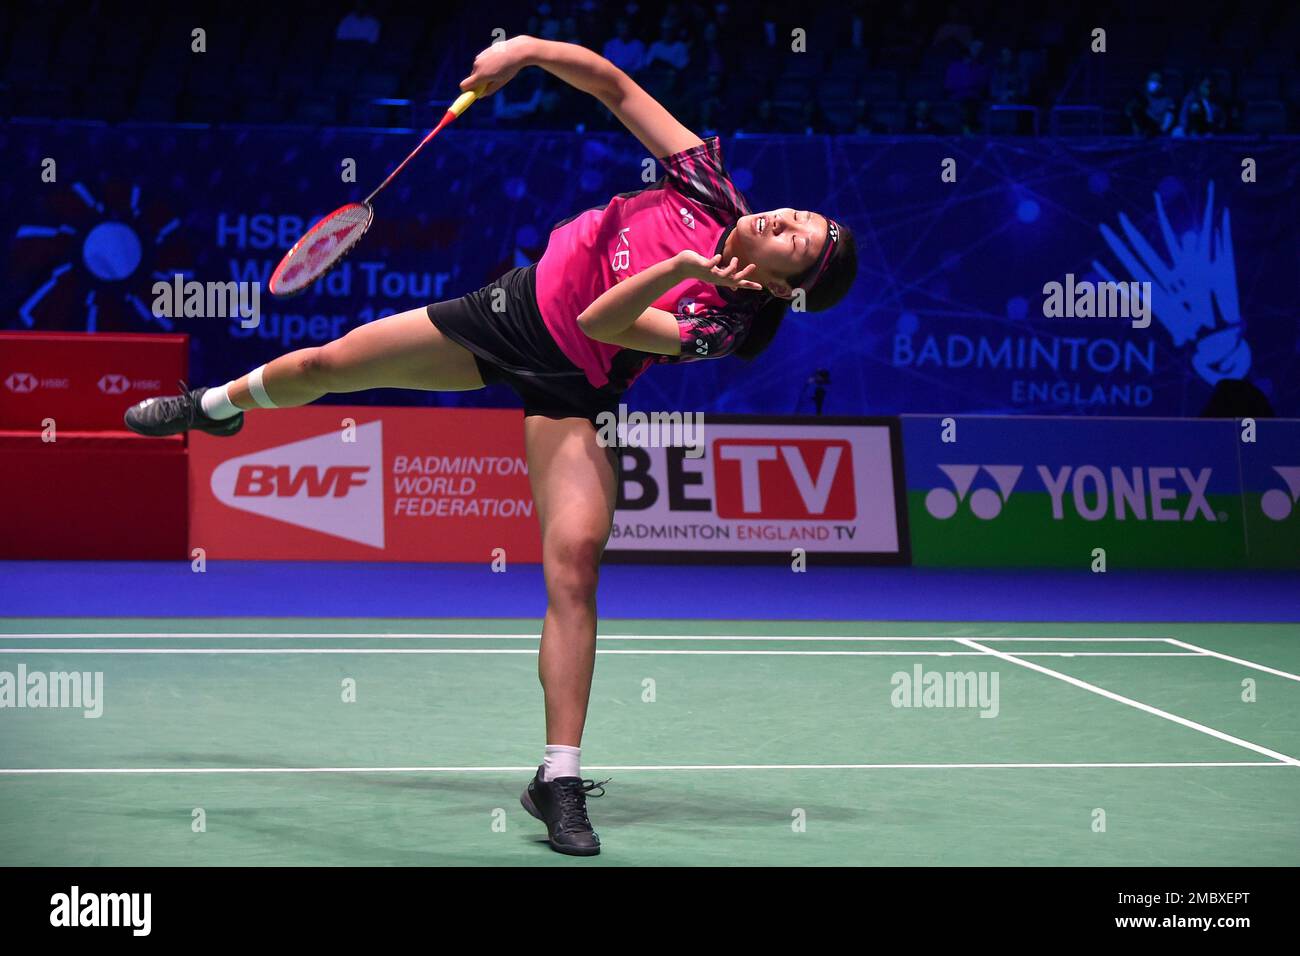 South Koreas An Se-young competes against Taiwans Tai Tzu Ying during their womens singles semifinal match at the All England Open Badminton Championships in Birmingham, England, Saturday, March 19, 2022